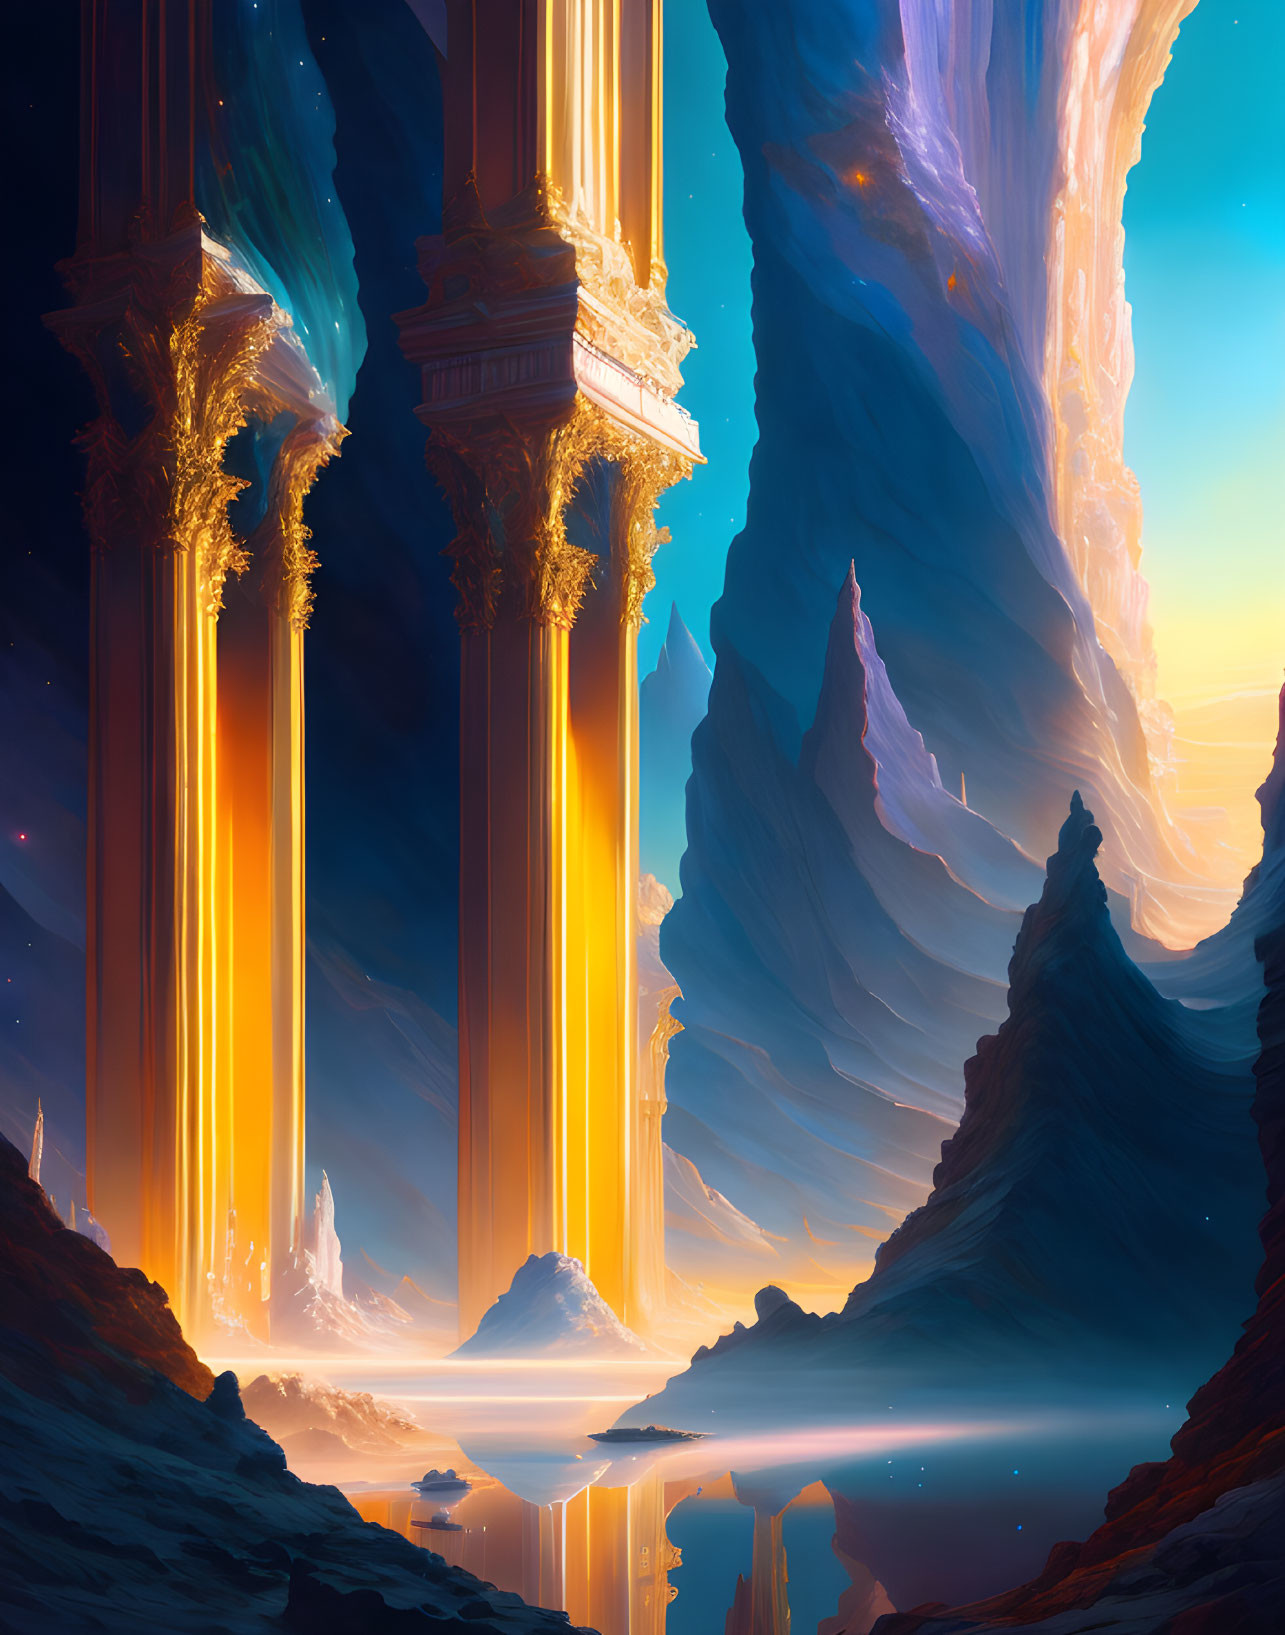 Majestic alien landscape with towering pillars and glowing waterfalls